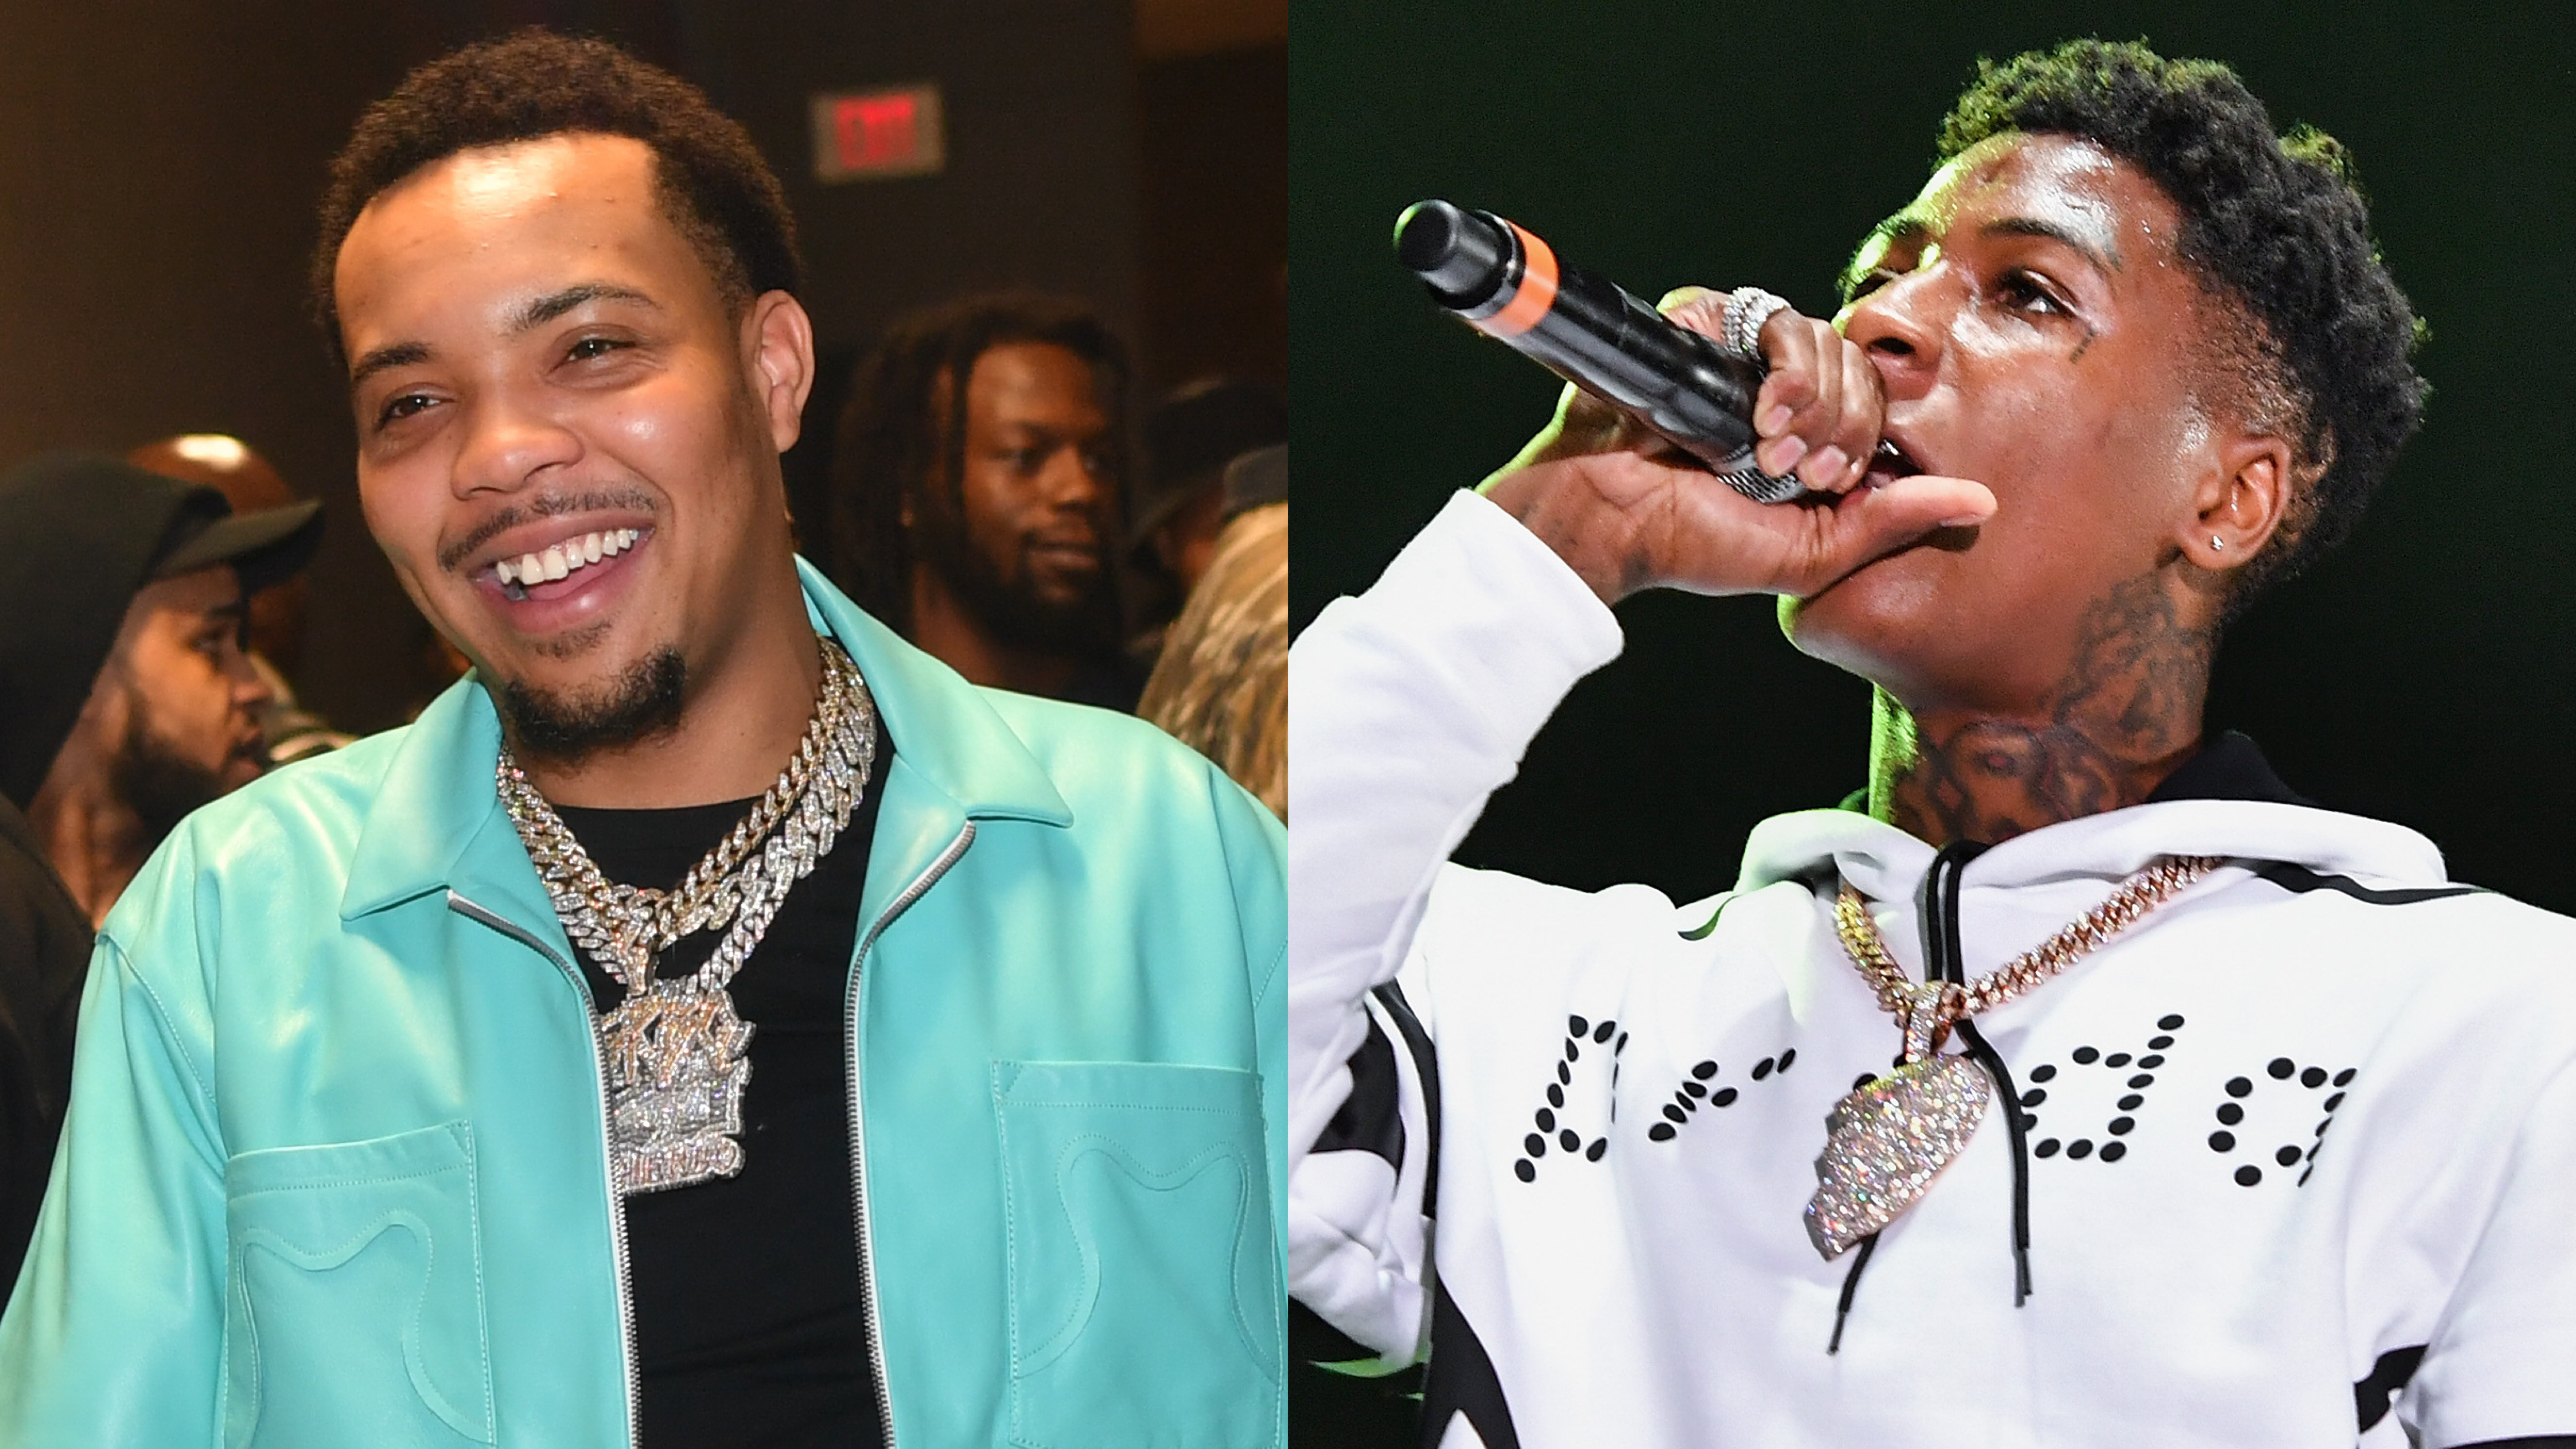 G Herbo Has The Internet Weak For NBA YoungBoy Impression